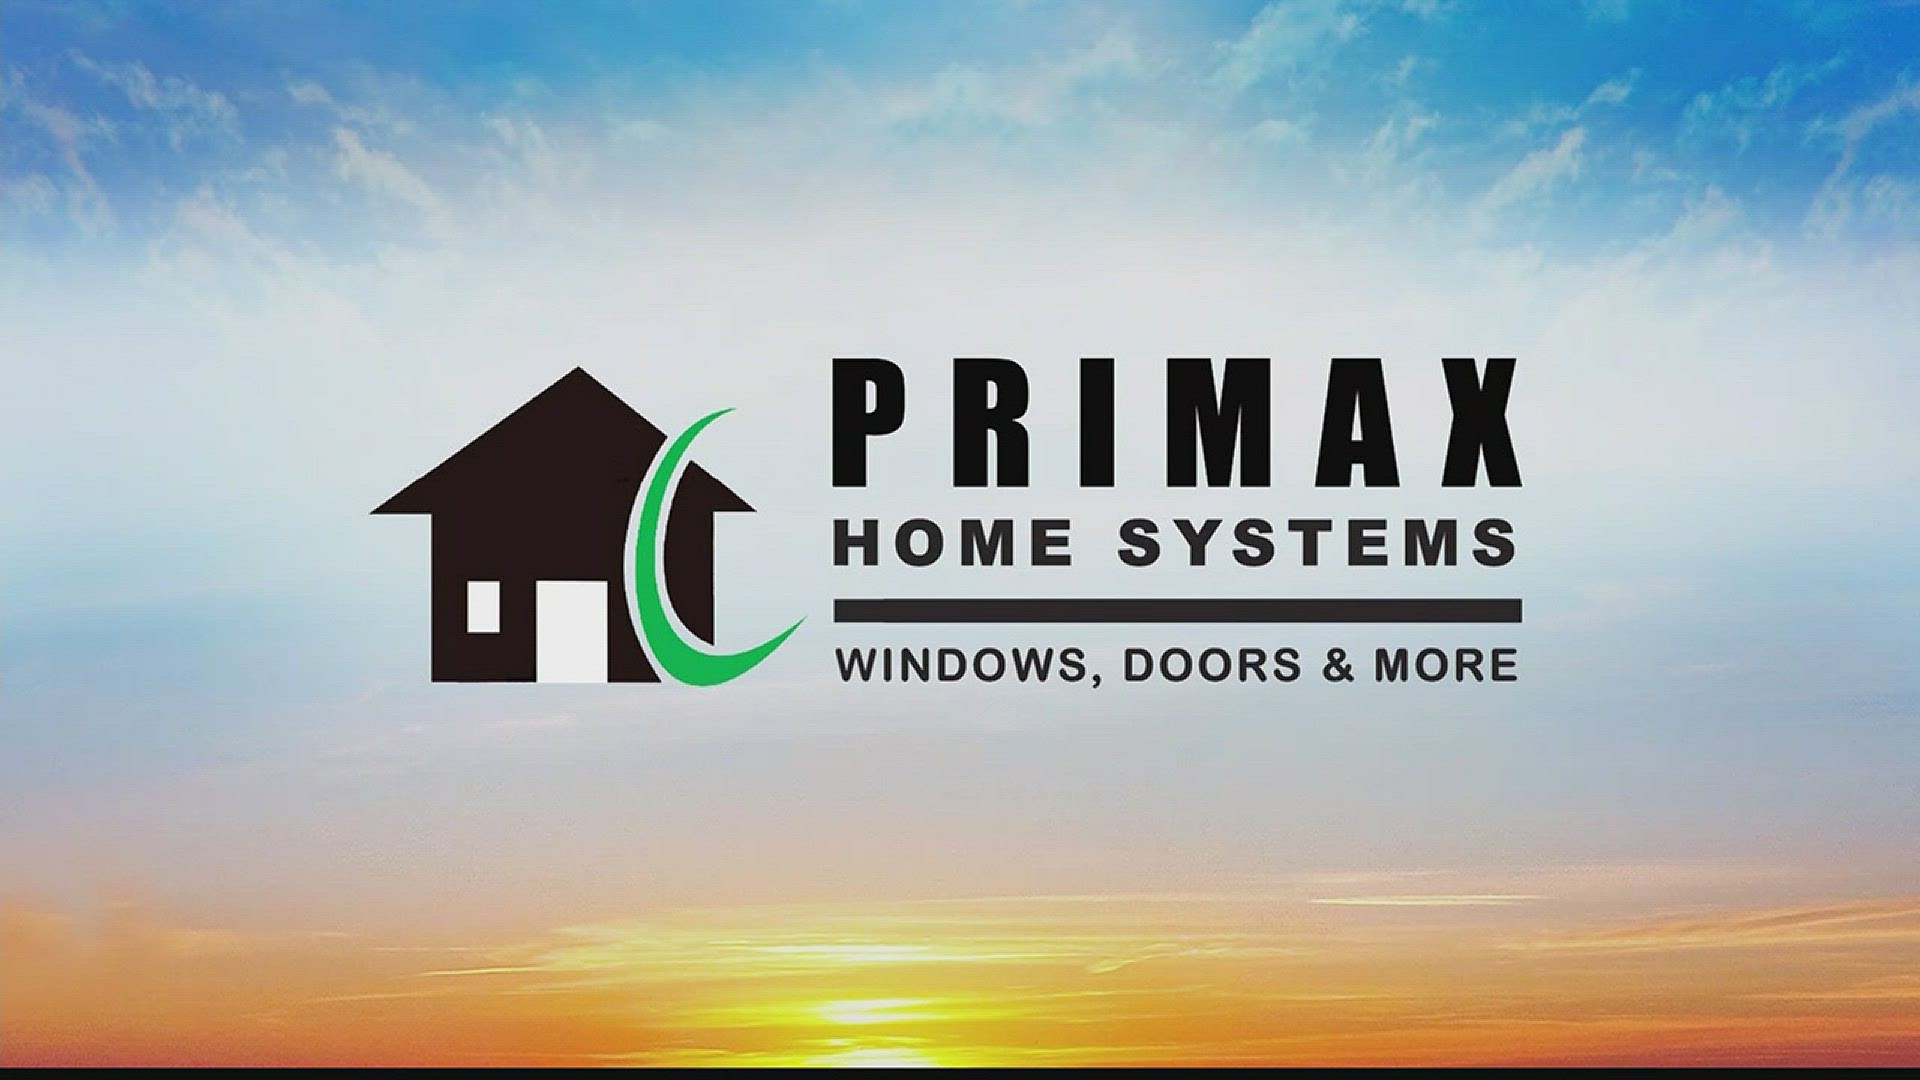 Spring is right around the corner and the folks at Primax want you to be prepared for you warmer-weather housing projects.